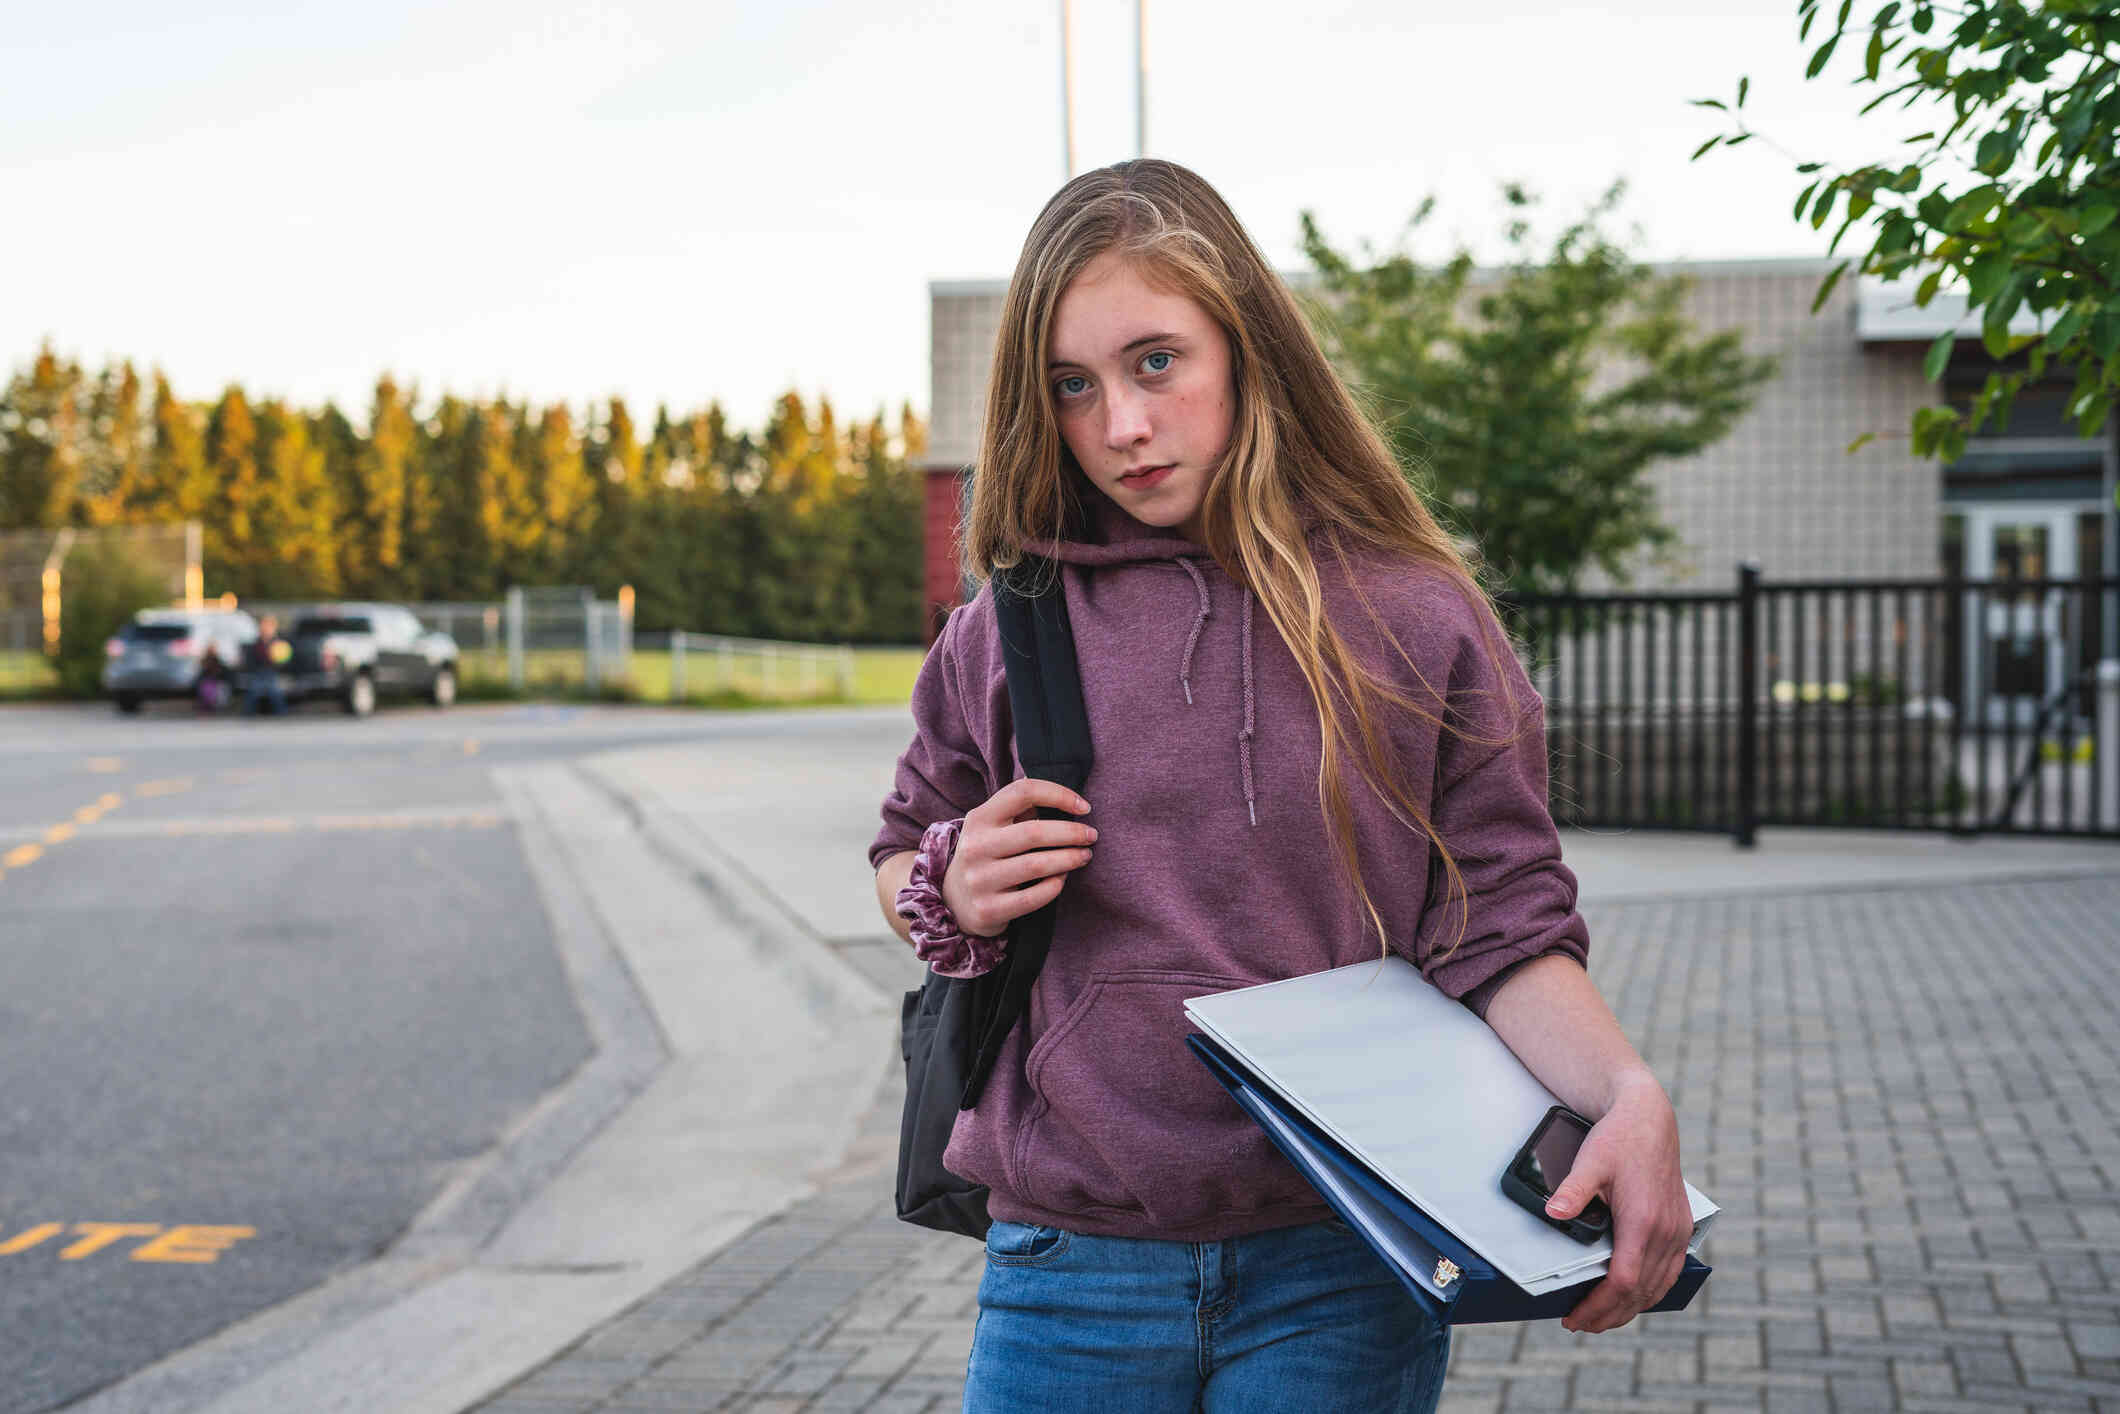 A teenage girl in a purple hoodie stands outside of her school with her backpack and looks at the camera with a serious expression.